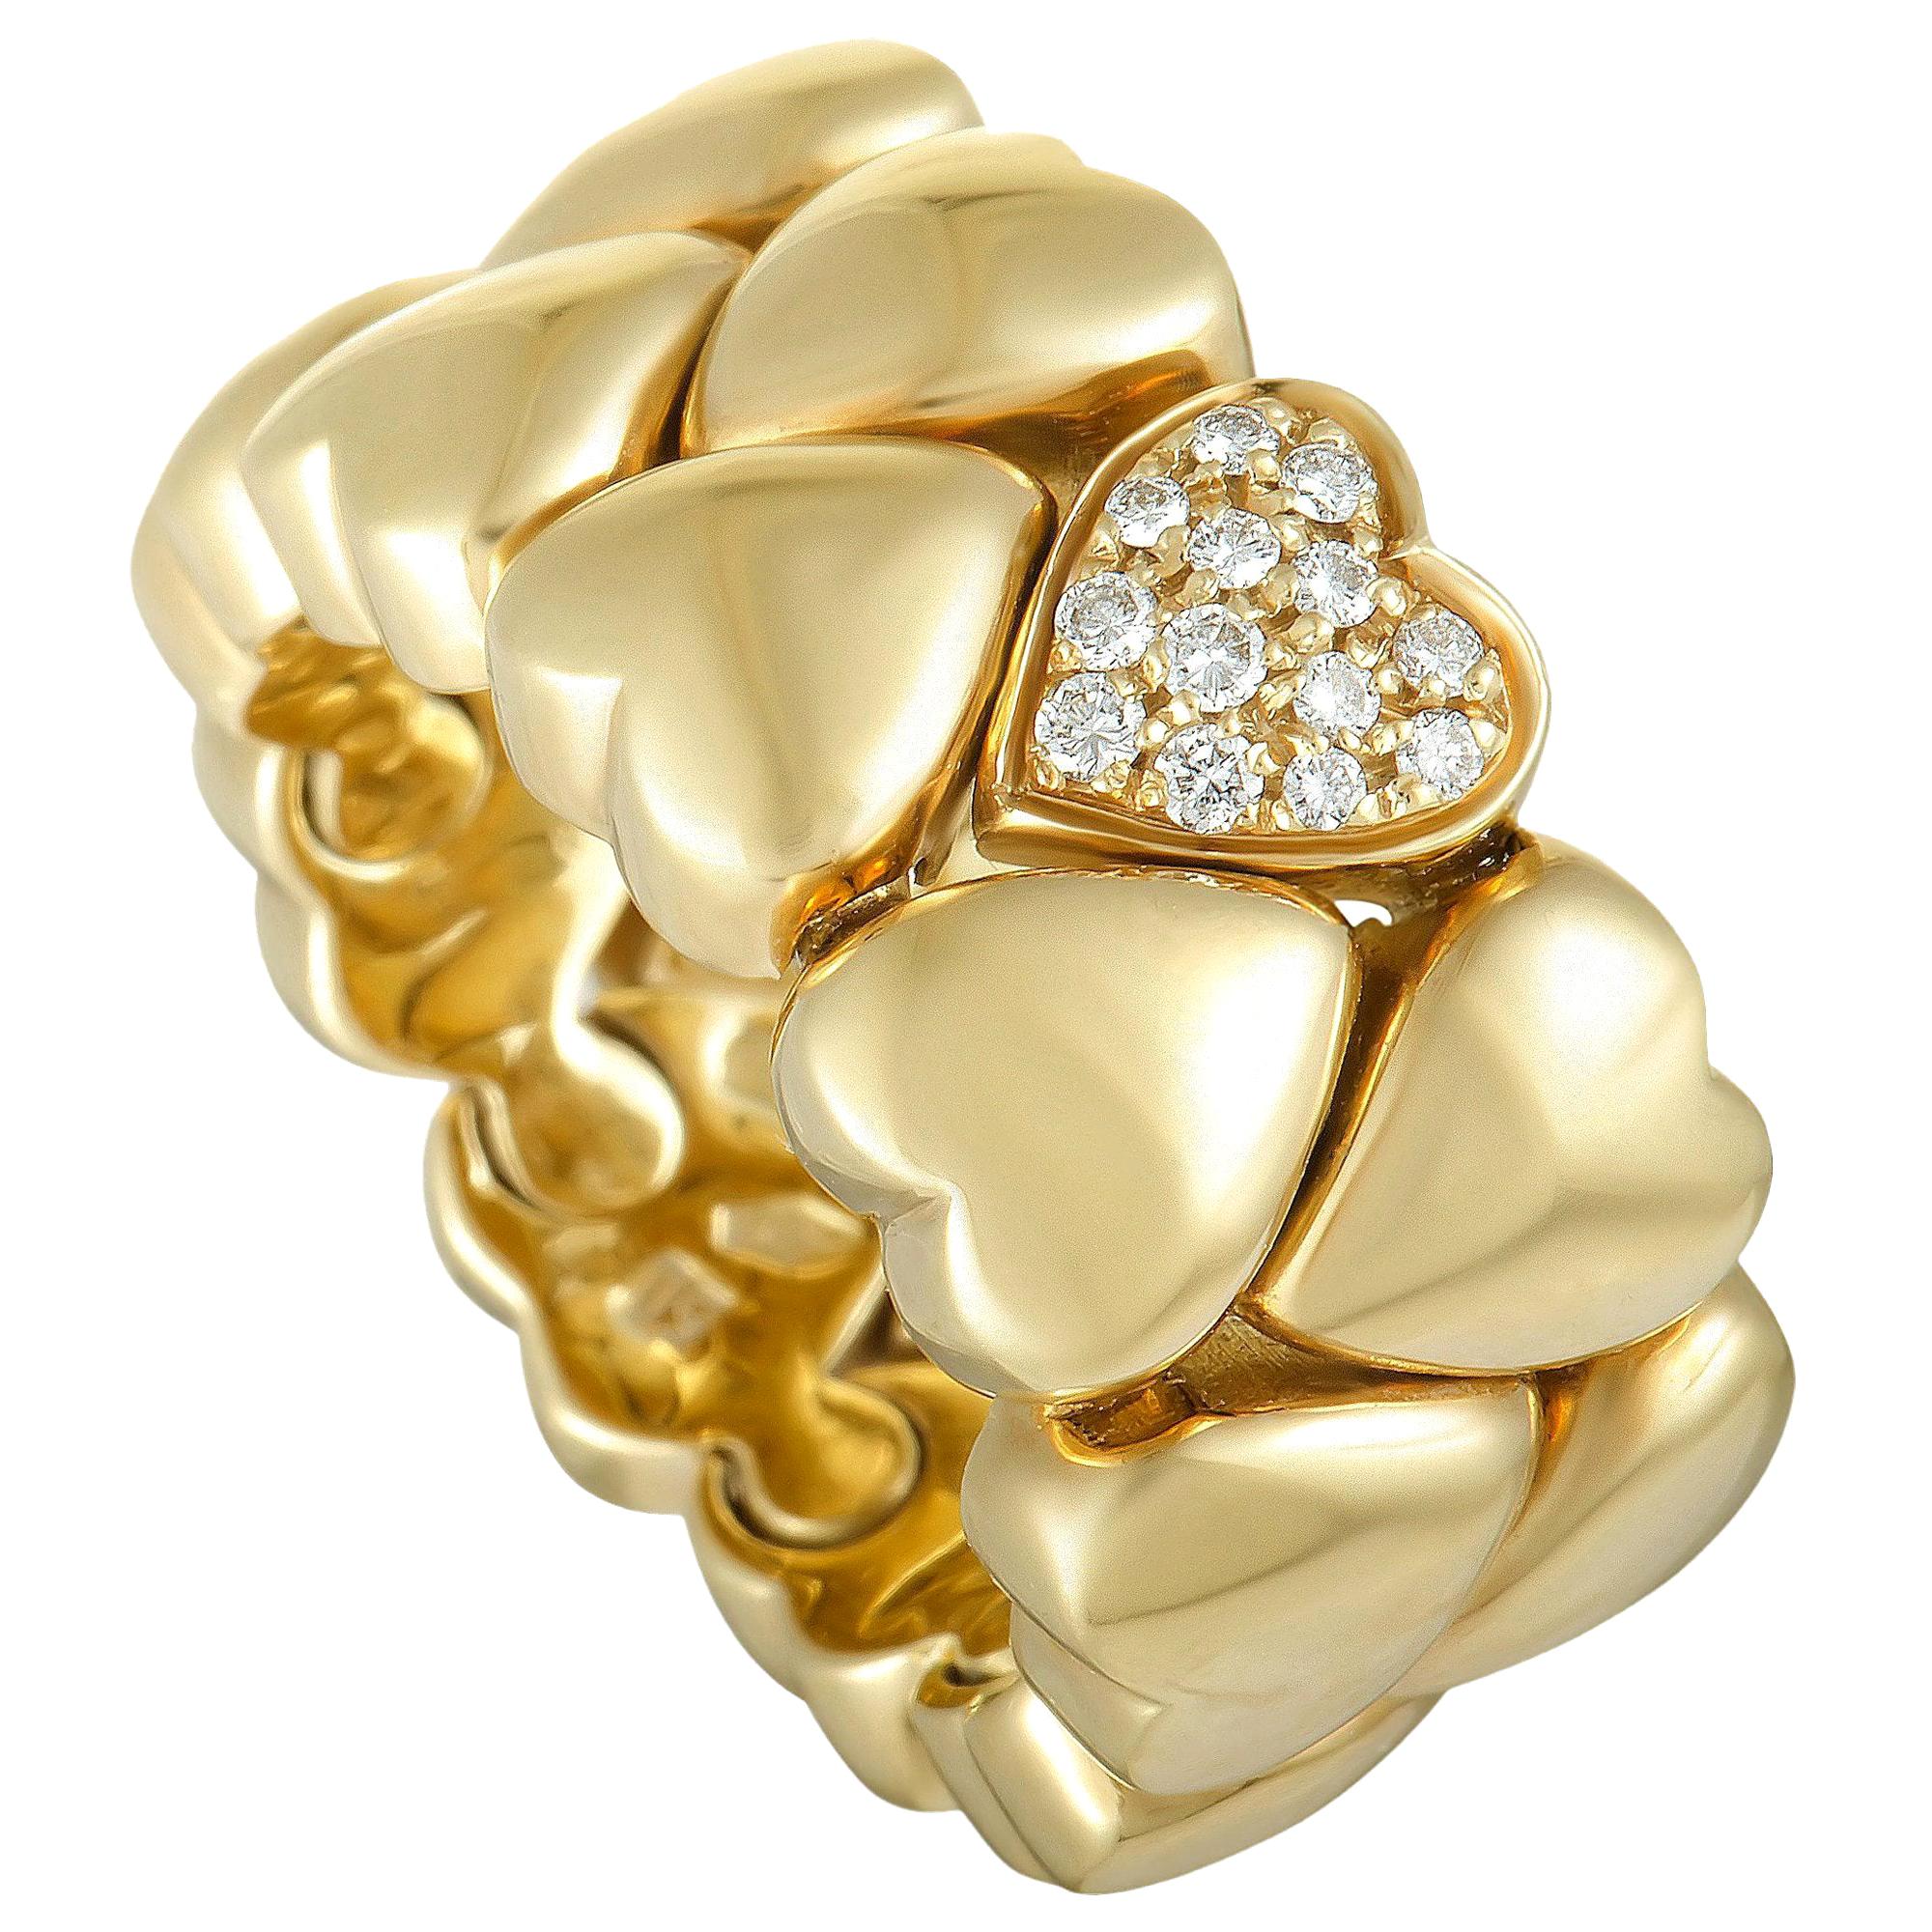 cartier double heart ring